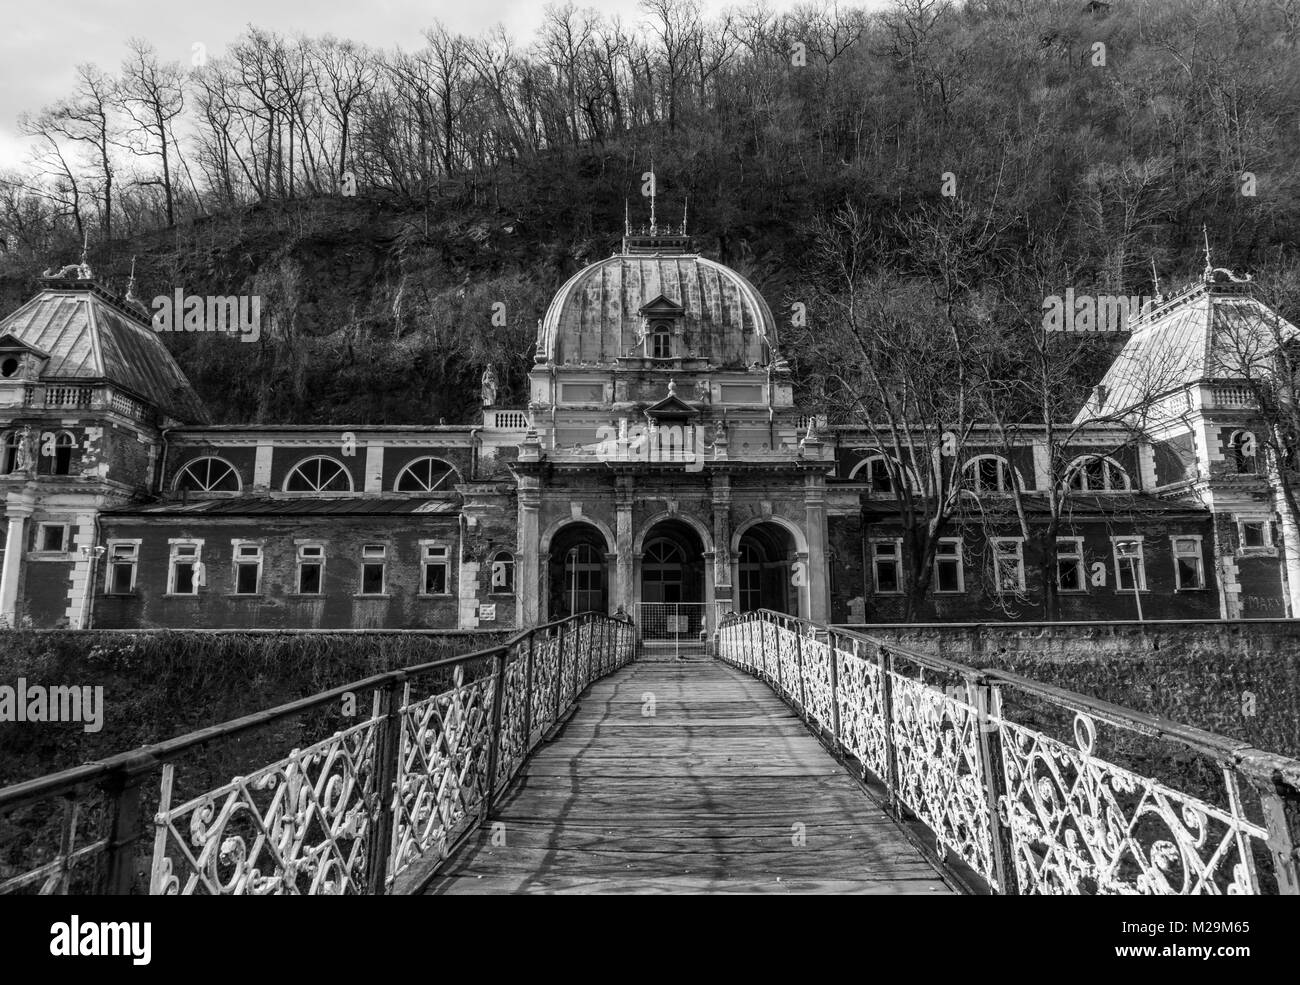 Baile Herculane, Romania - 01.01.2018: Black and white shot of the Imperial Baths and the bridge leading to them Stock Photo